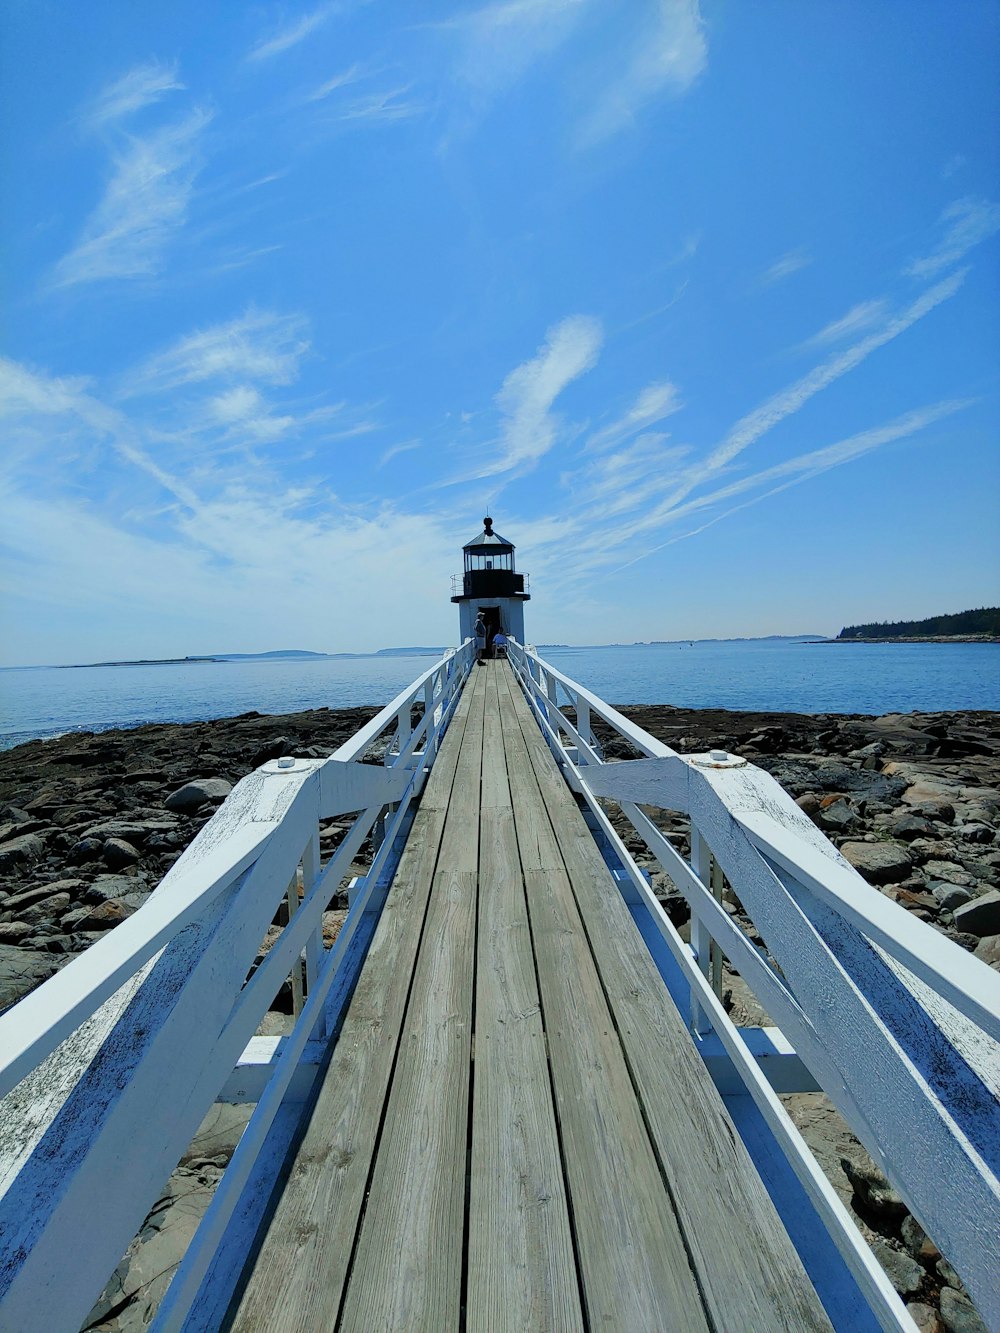 a wooden pier with a light house on top of it